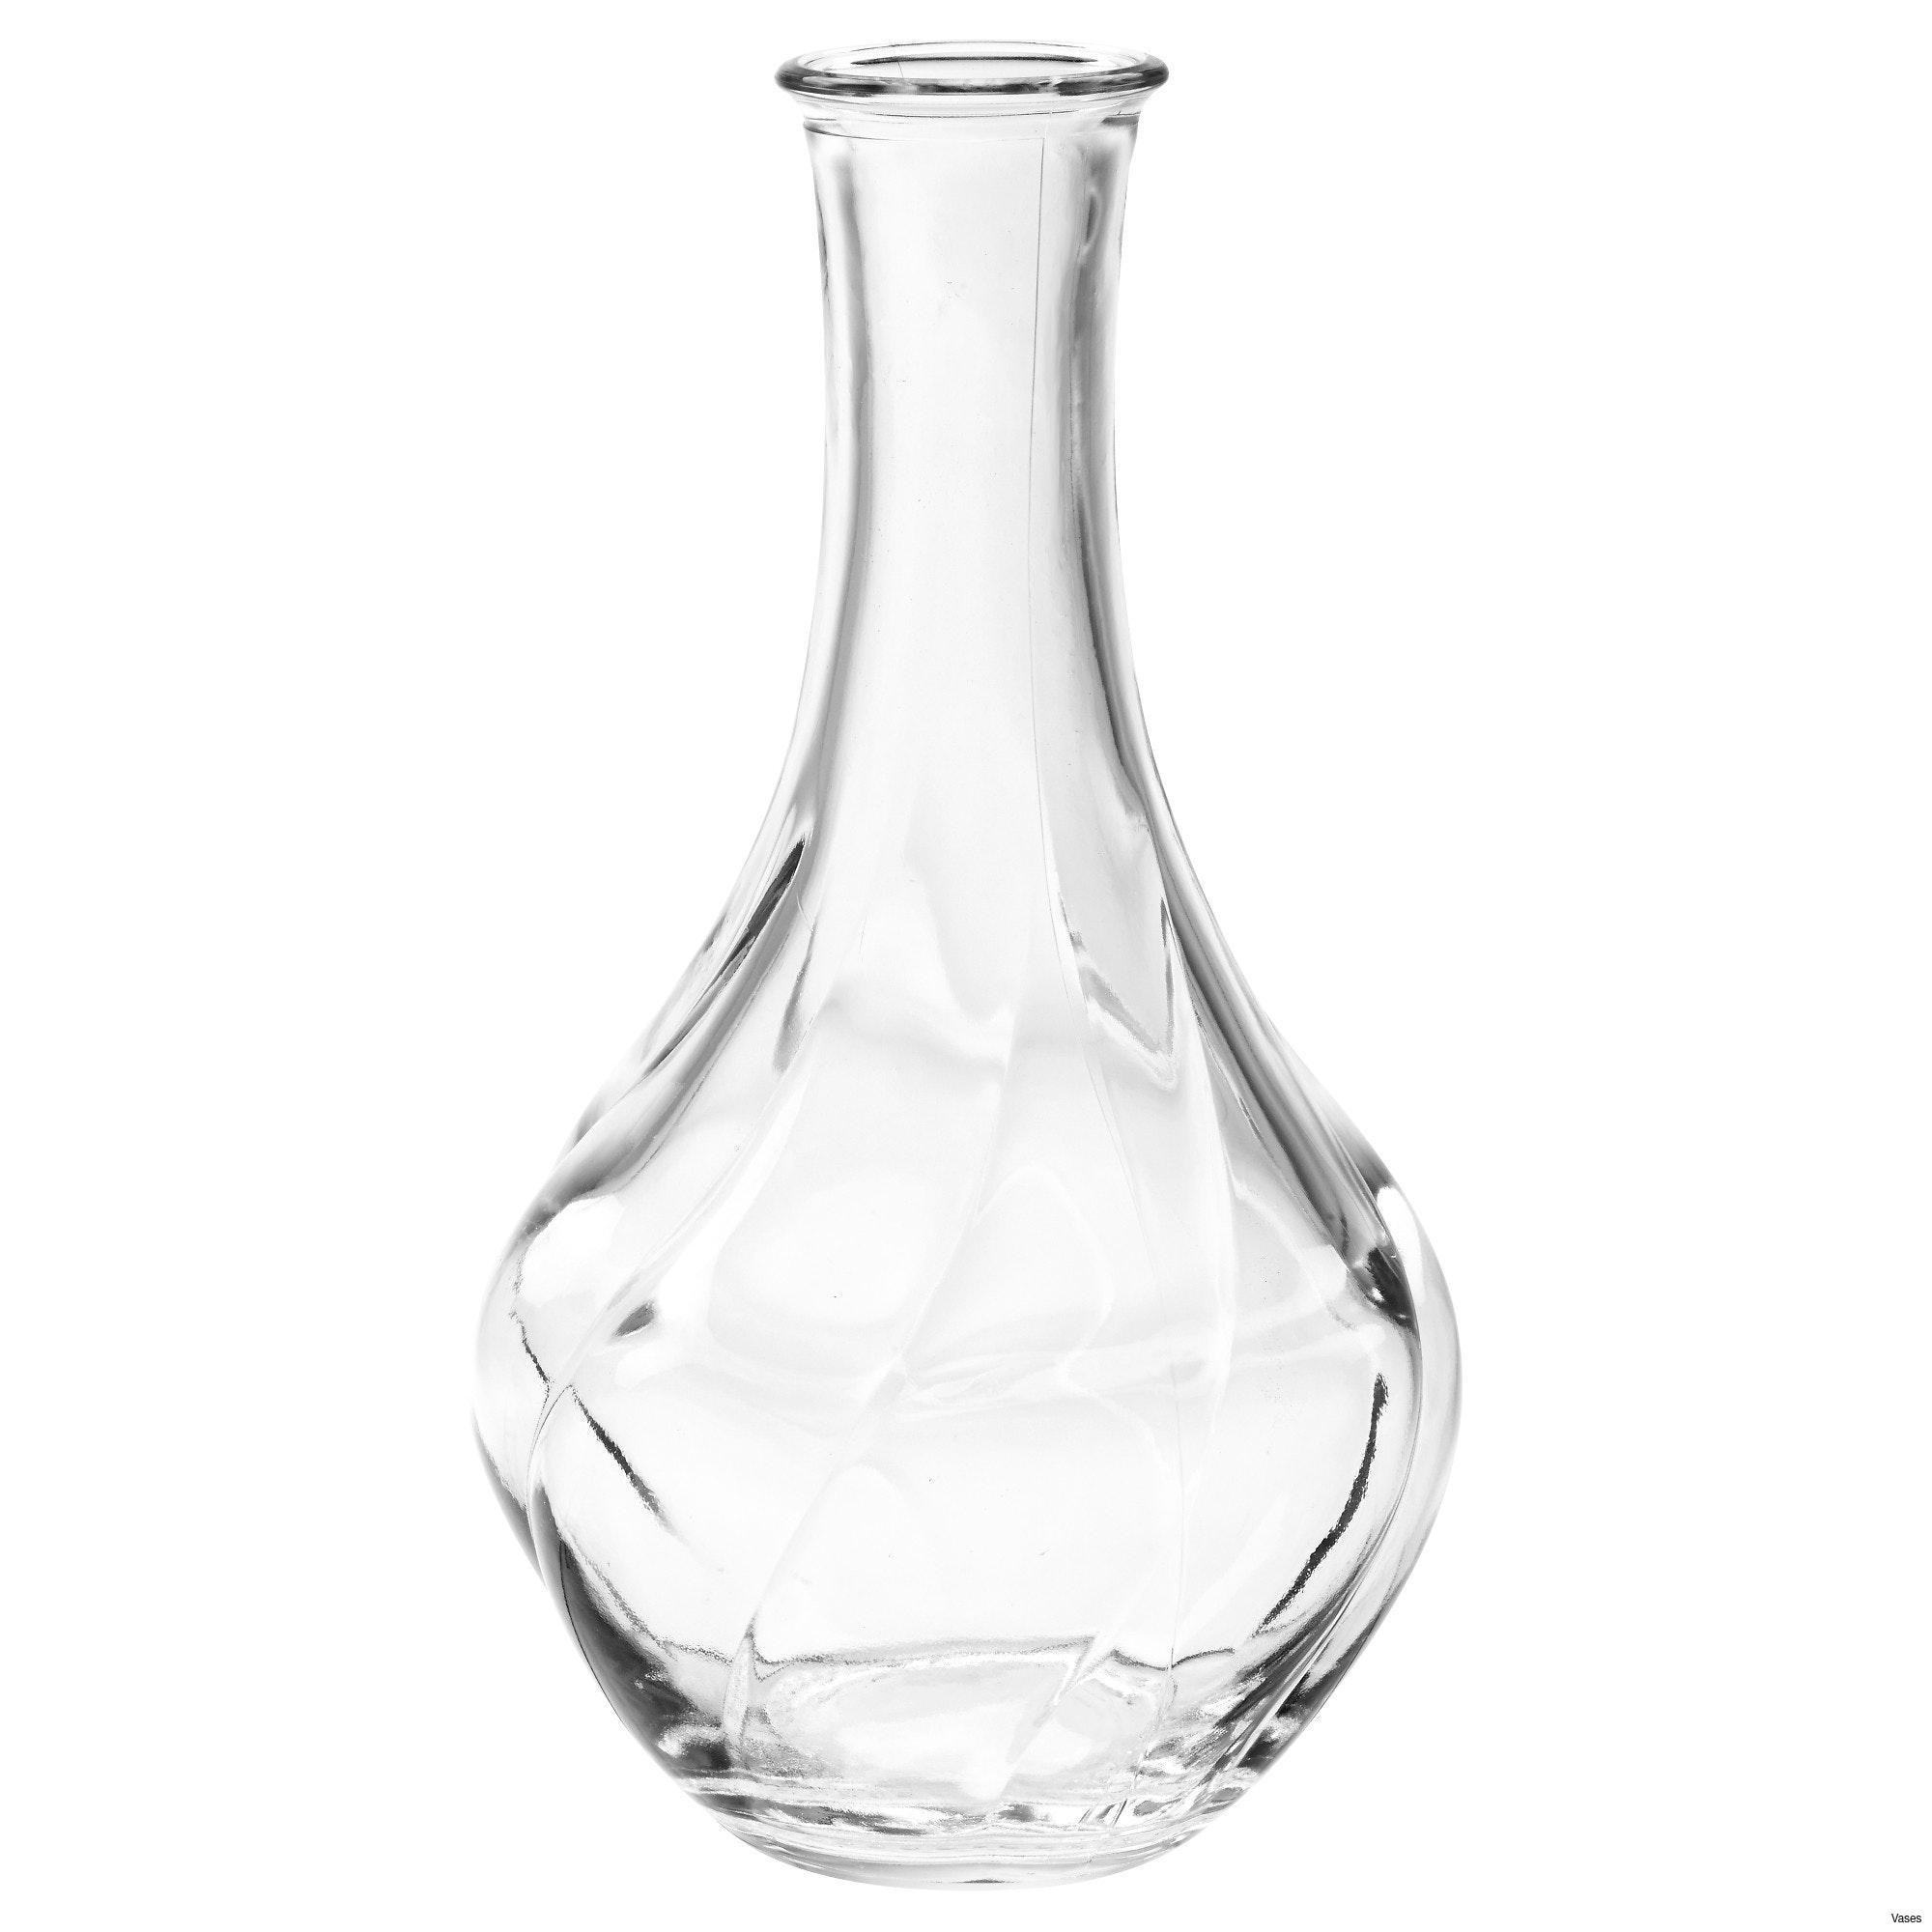 29 Fashionable Tall Thin Glass Vases 2024 free download tall thin glass vases of tall black vase images living room glass vases fresh clear vase 0d pertaining to tall black vase images living room glass vases fresh clear vase 0d tags amazing and 